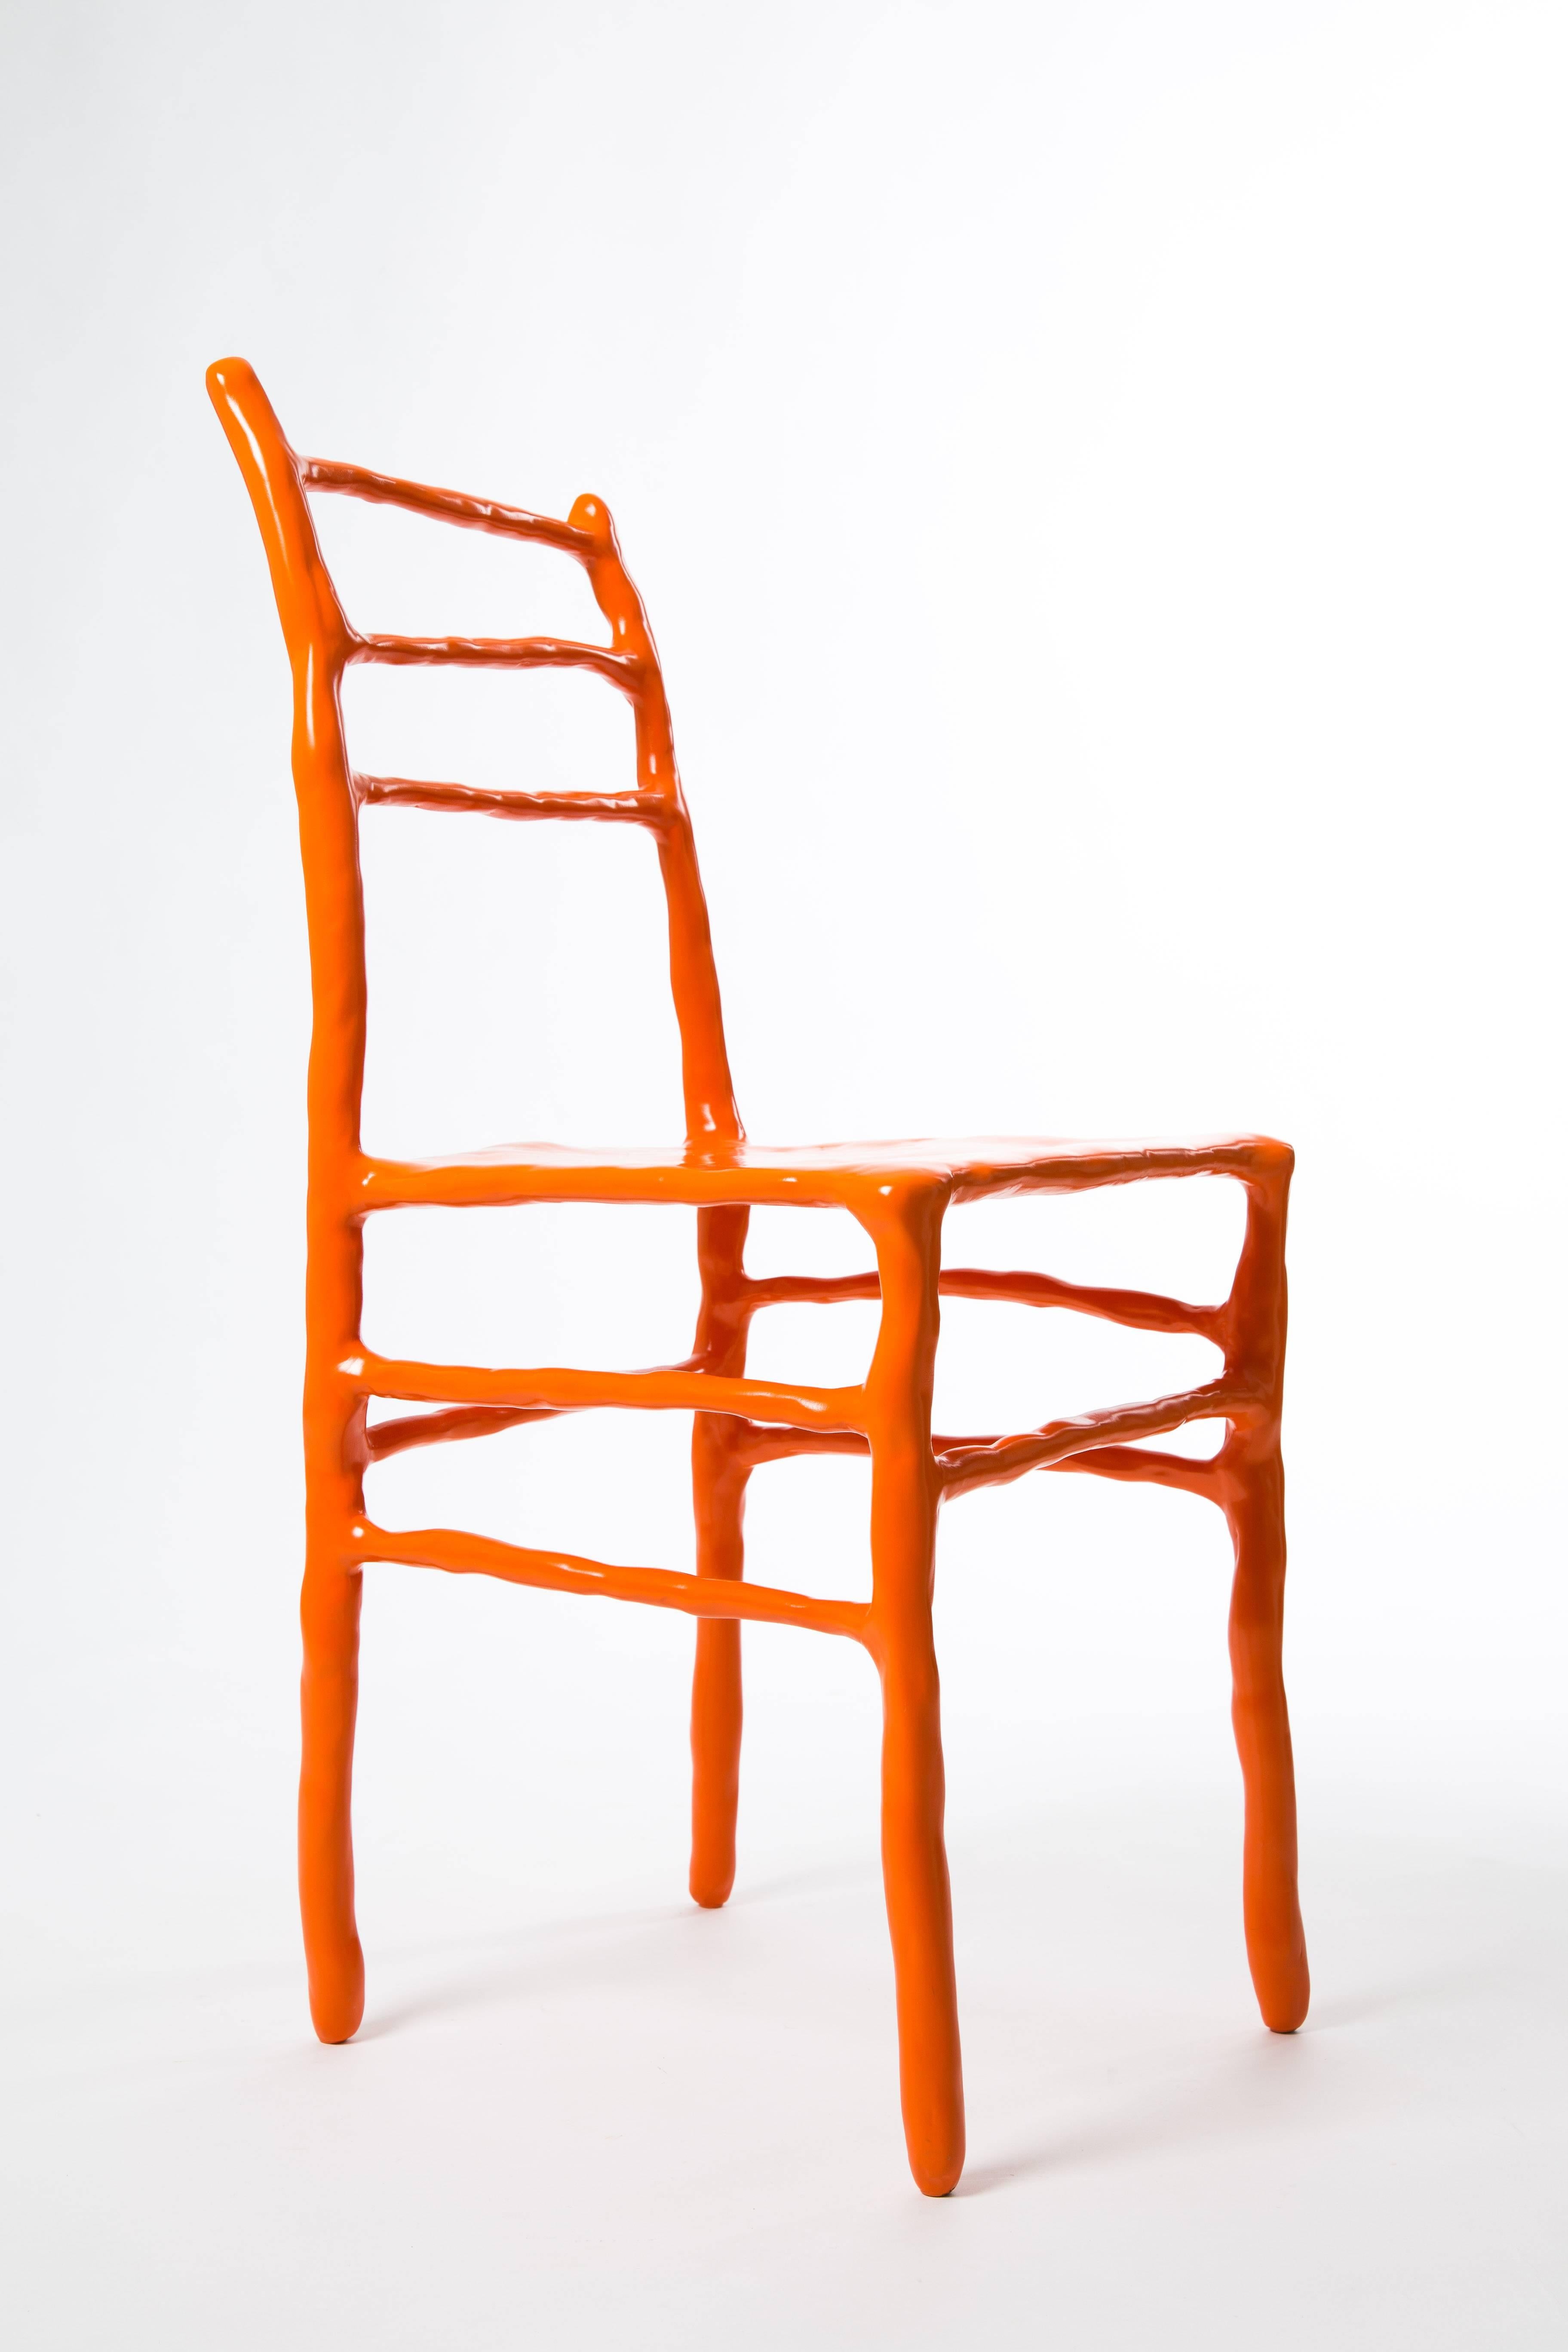 Contemporary Maarten Baas Clay Chair Limited Edition Basel Chair 2007 Orange For Sale